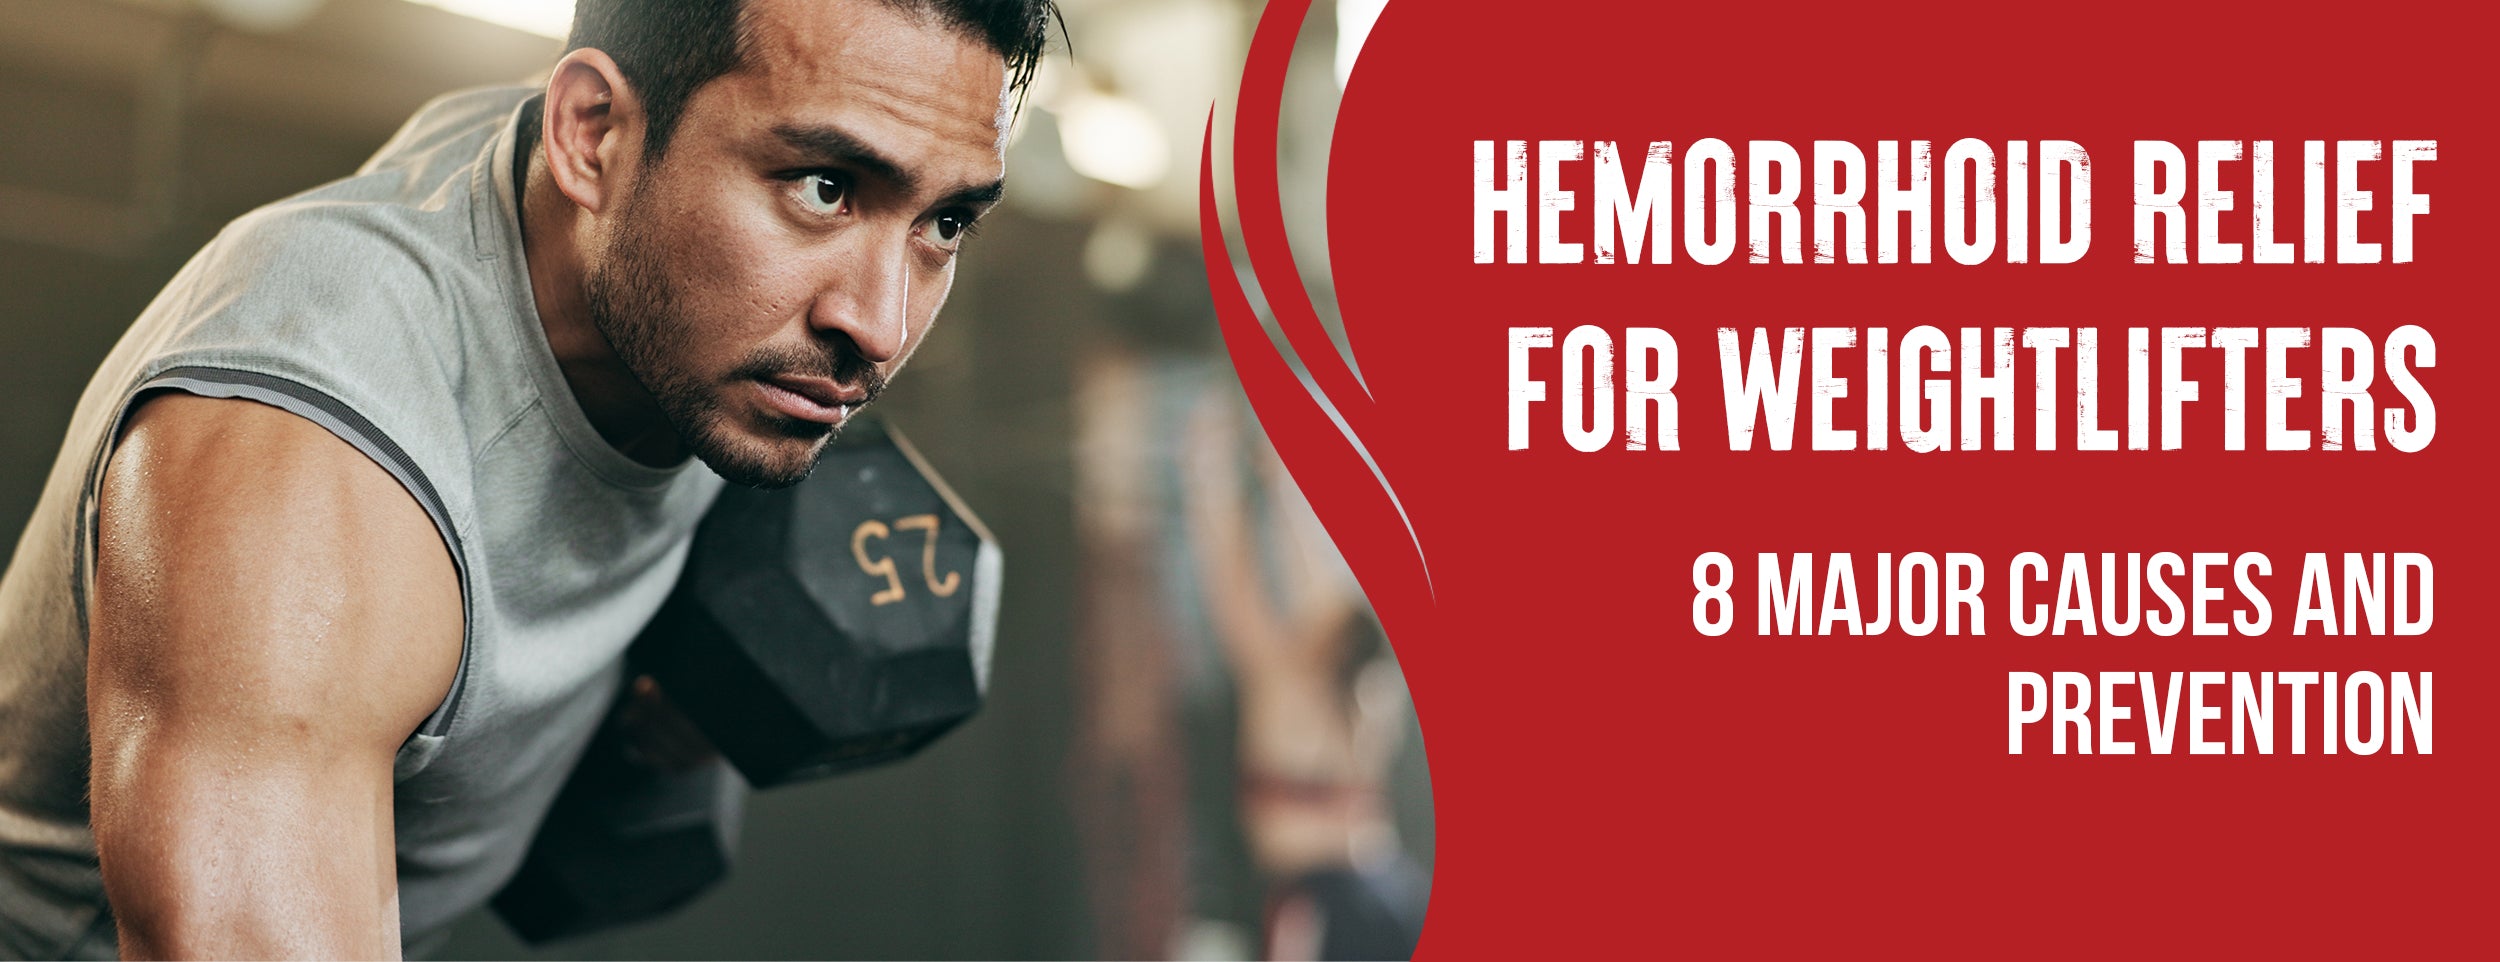 8 Major Causes and Prevention for Hemorrhoids in Weightlifters